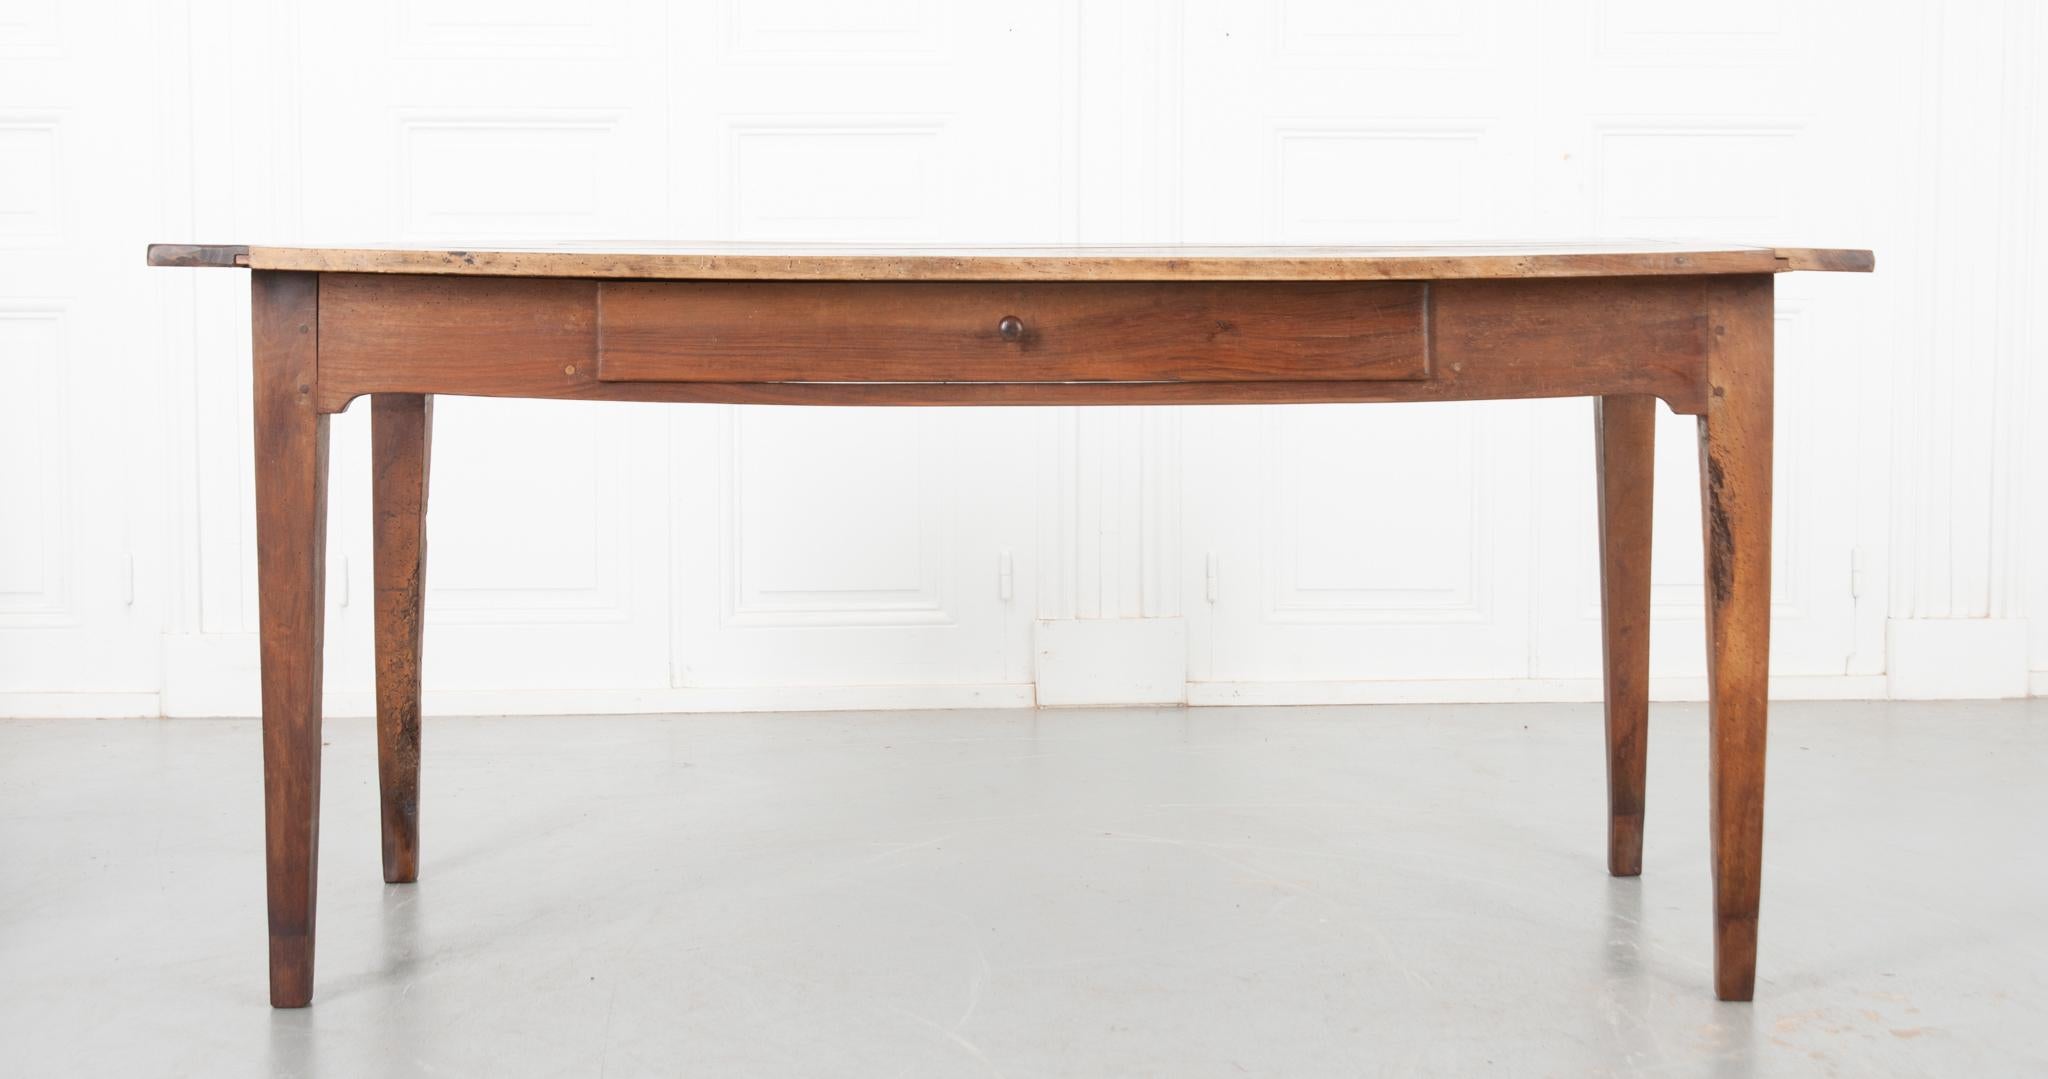 This solid walnut farm table is from 19th century France. The top is constructed with four planks of beautiful walnut, smoothed with a French wax paste. A single drawer is housed in the simple apron and fixed with a turned wooden pull. The whole is